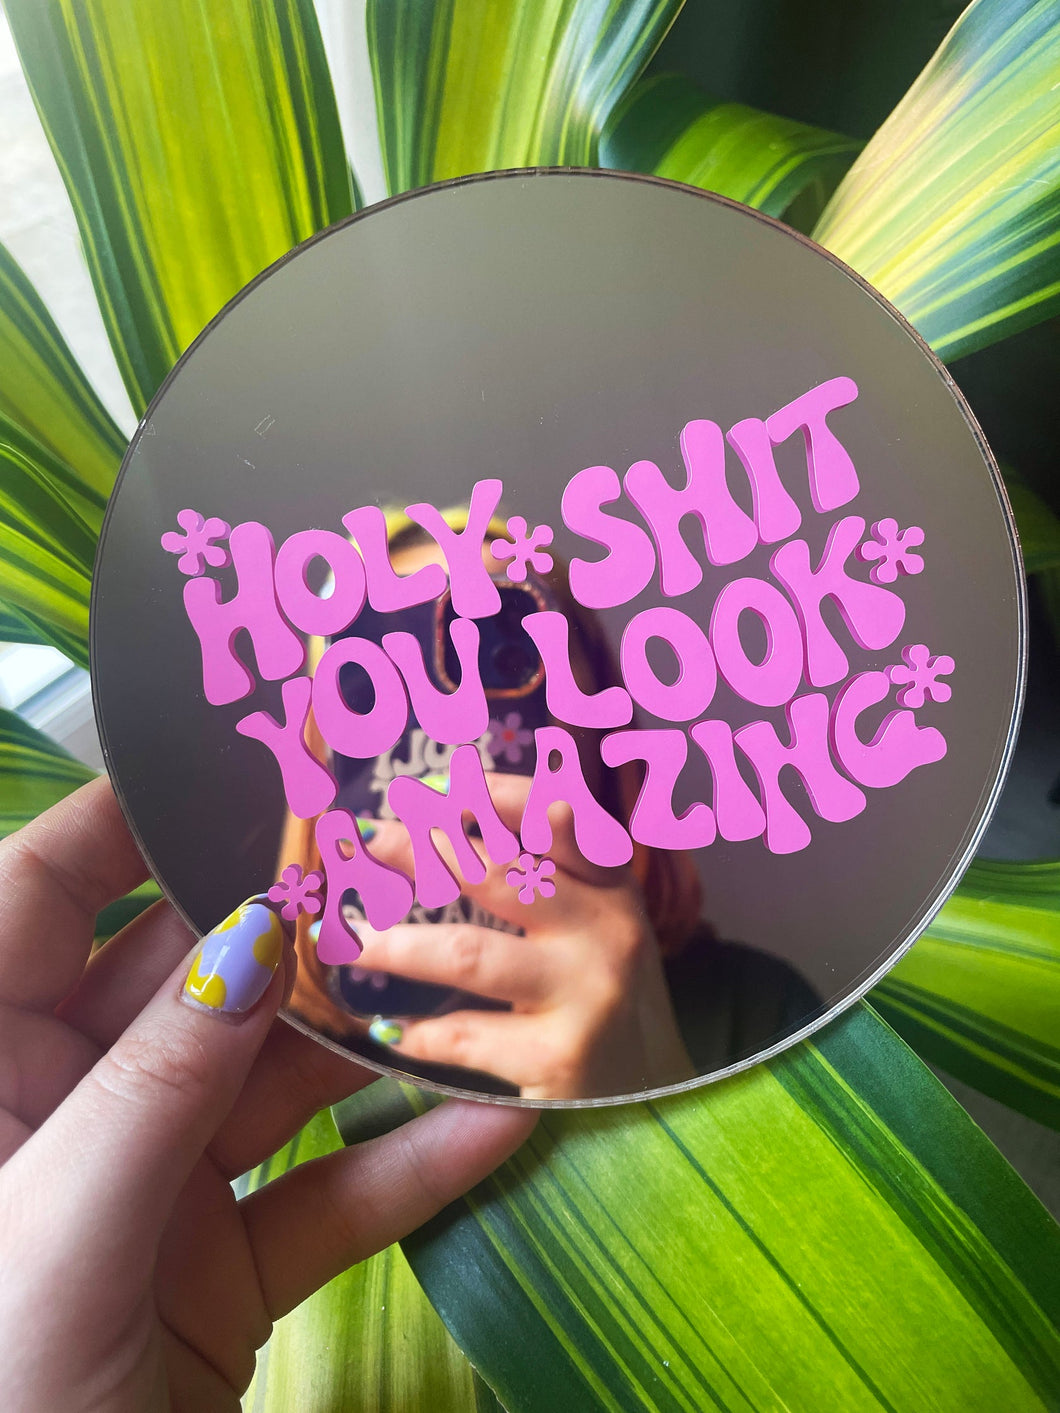 PRINTED WEIRD Holly Shit You Look Amazing Disc Mirror